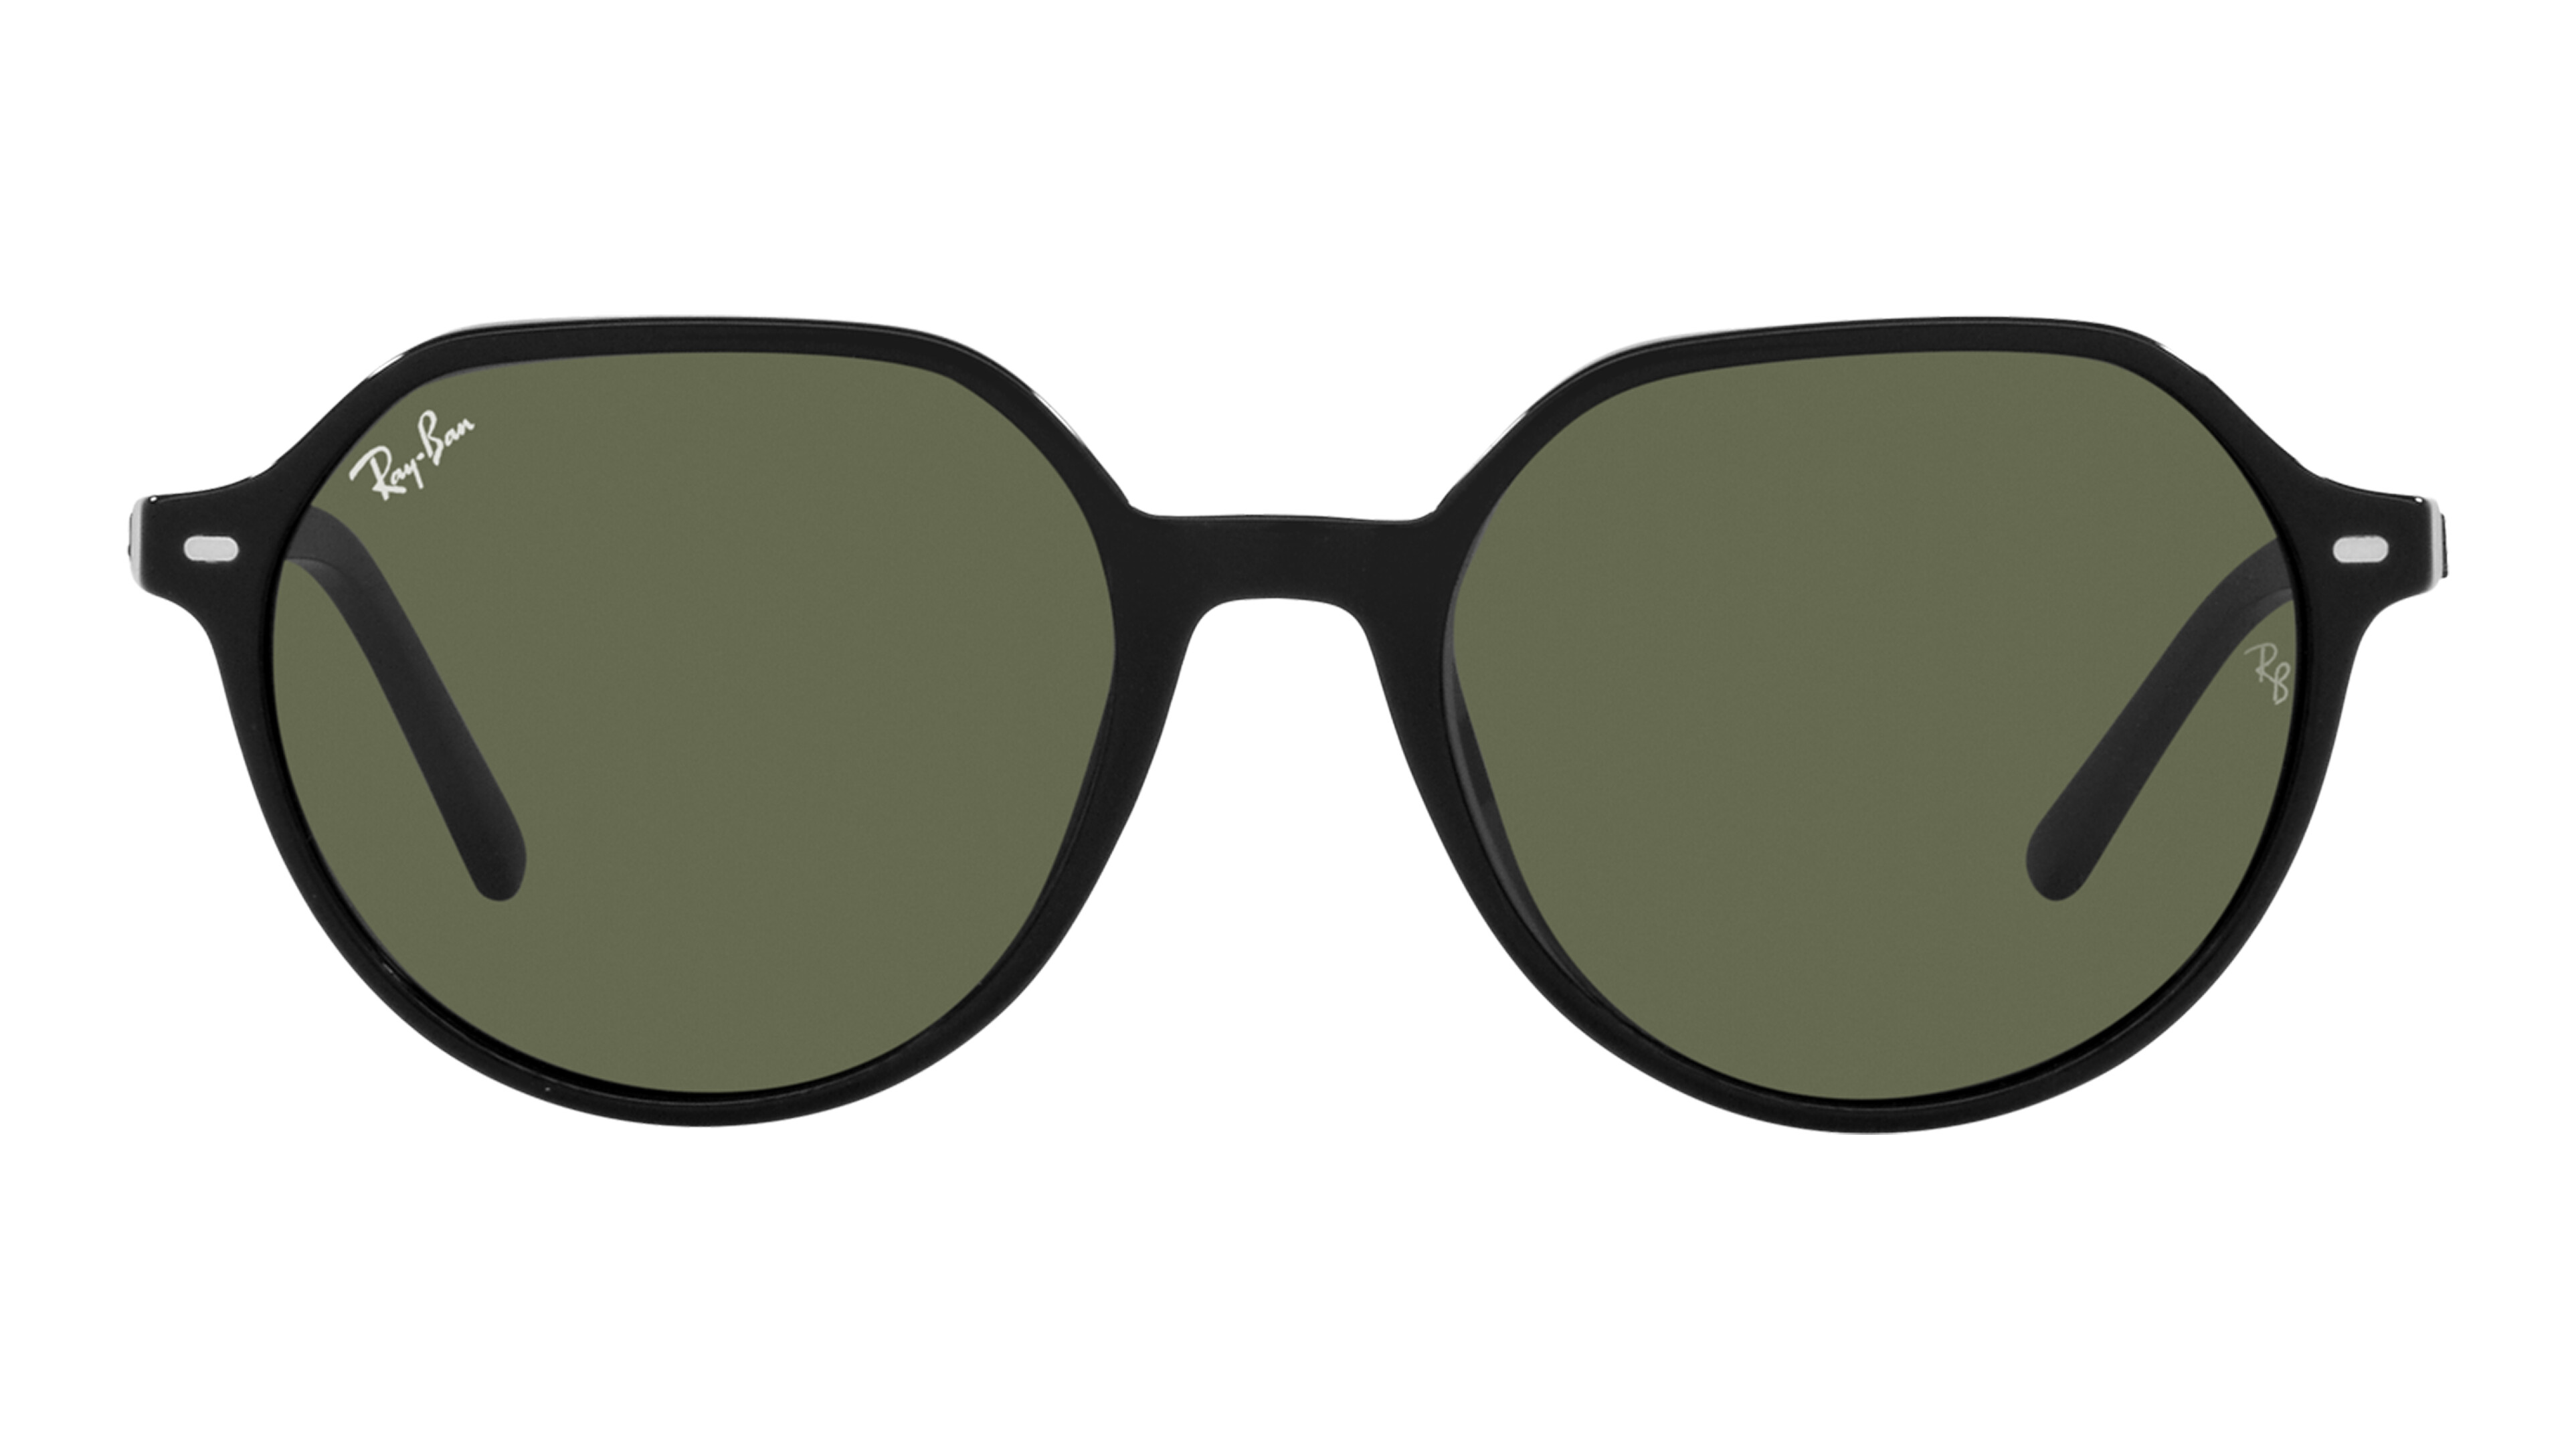 [products.image.front] Ray-Ban THALIA 0RB2195 901/31 Sonnenbrille